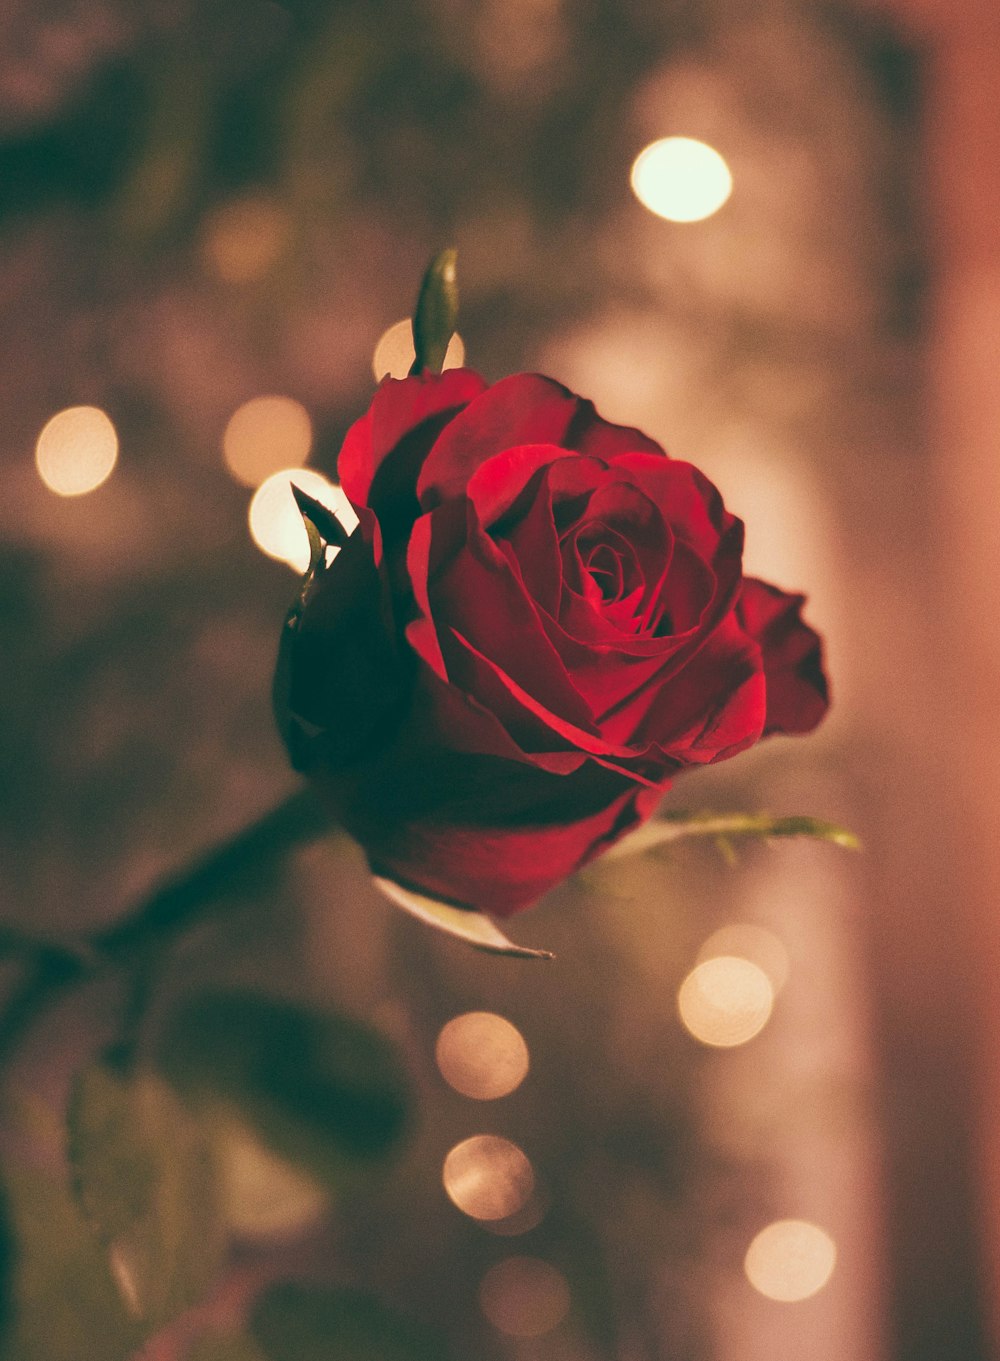 Focused photo of a red rose photo – Free Flower Image on Unsplash